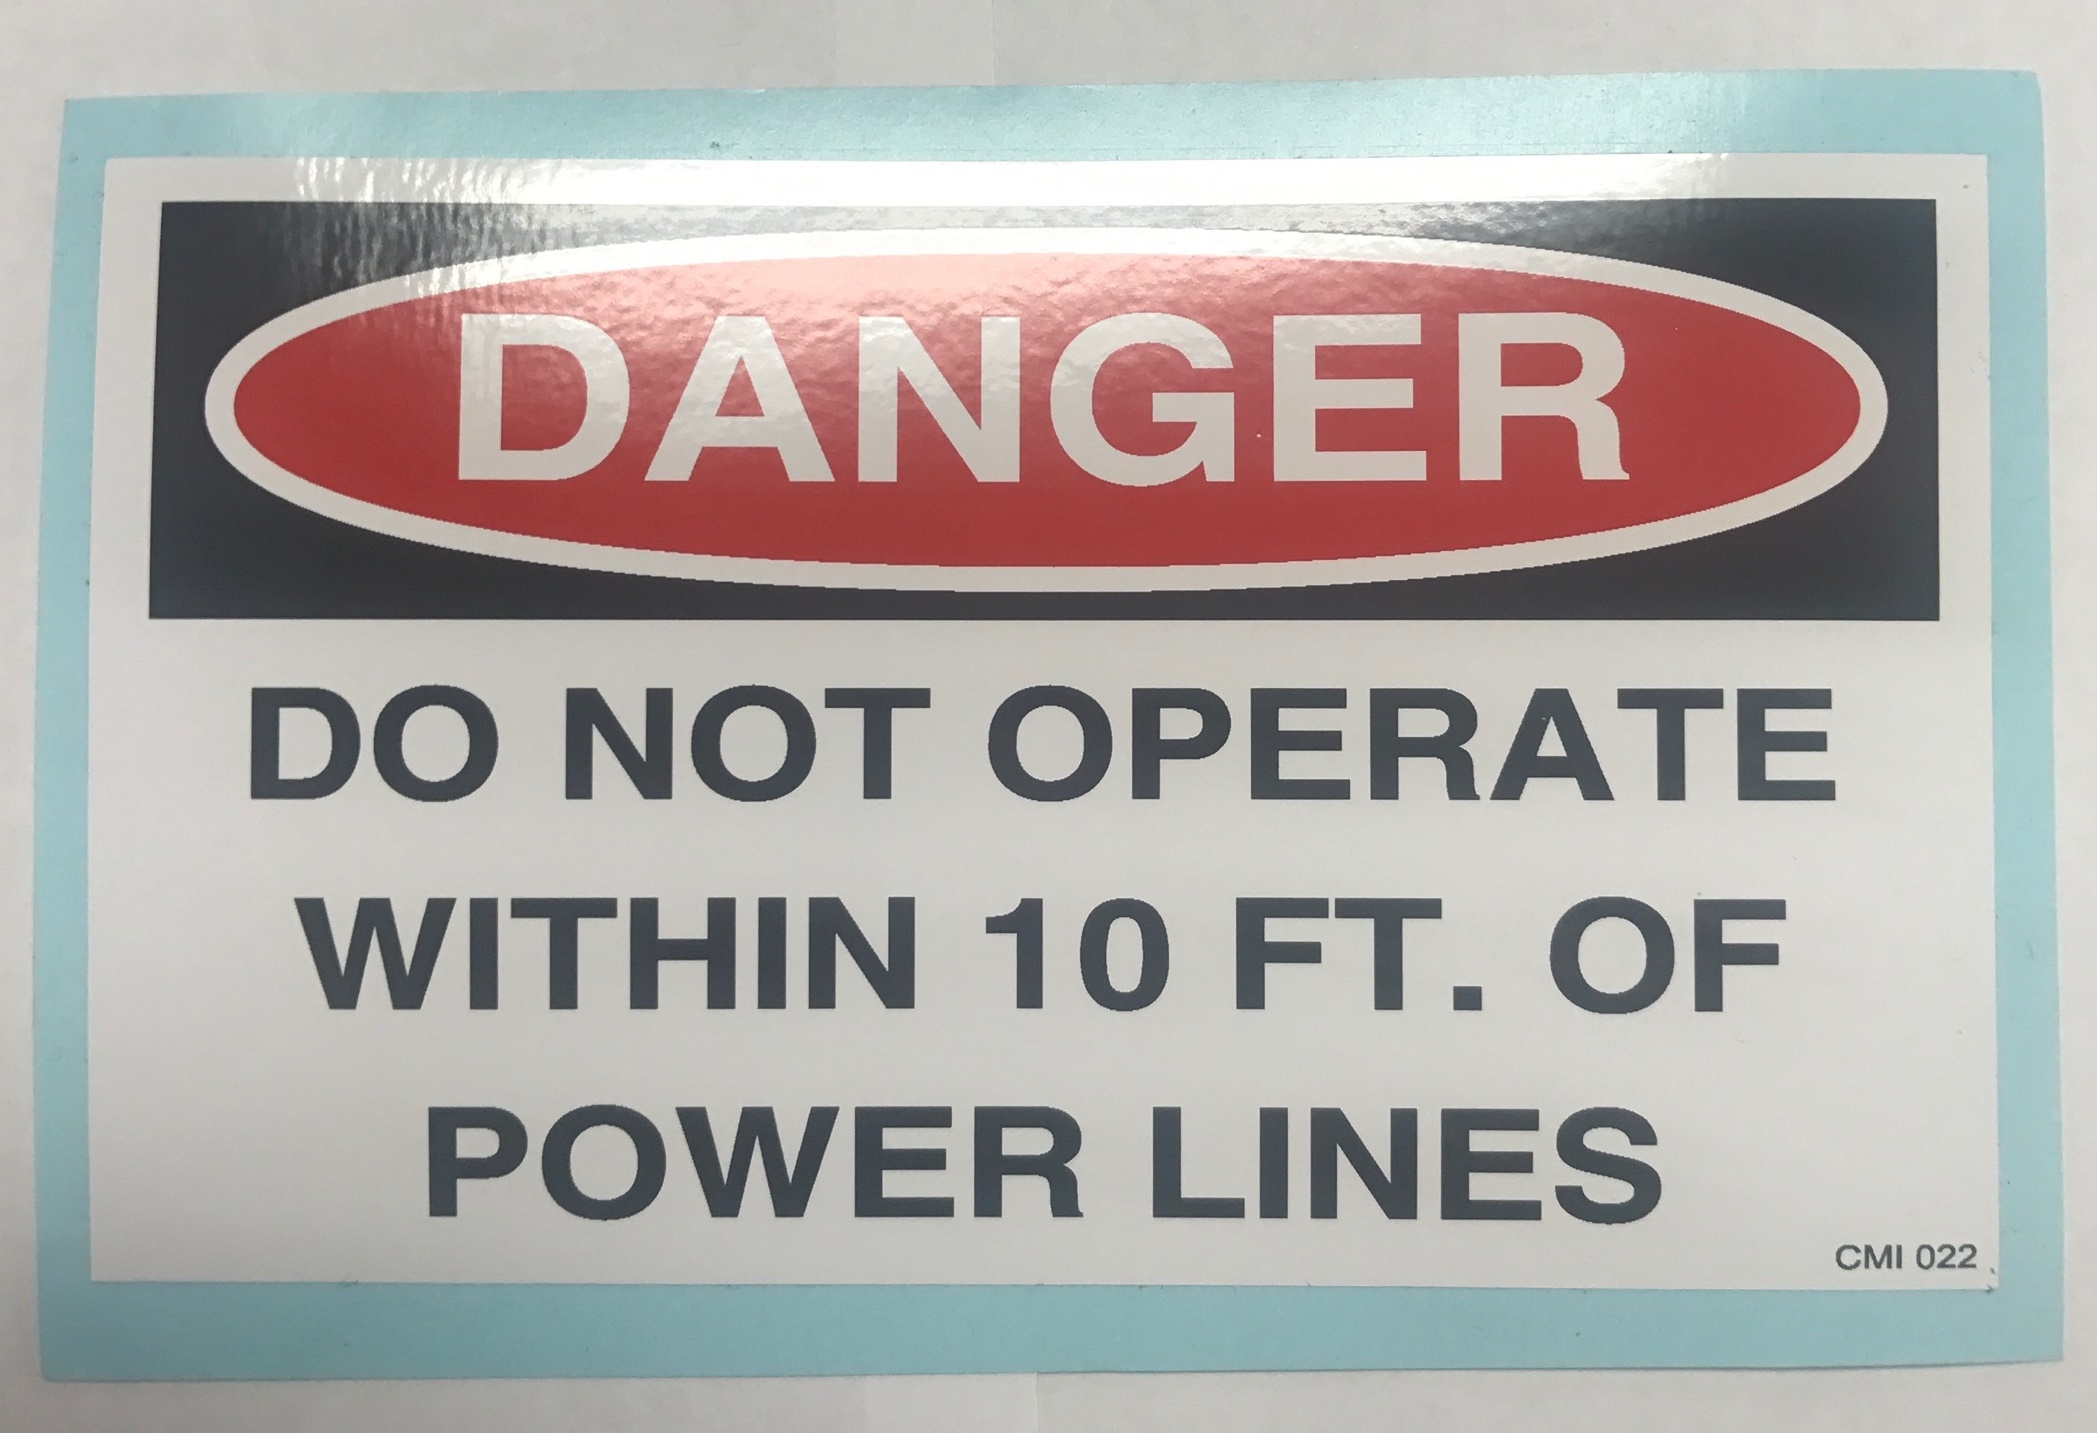 Decal - "Danger - Power Lines" - 3" x 5" (Red/Black on White)